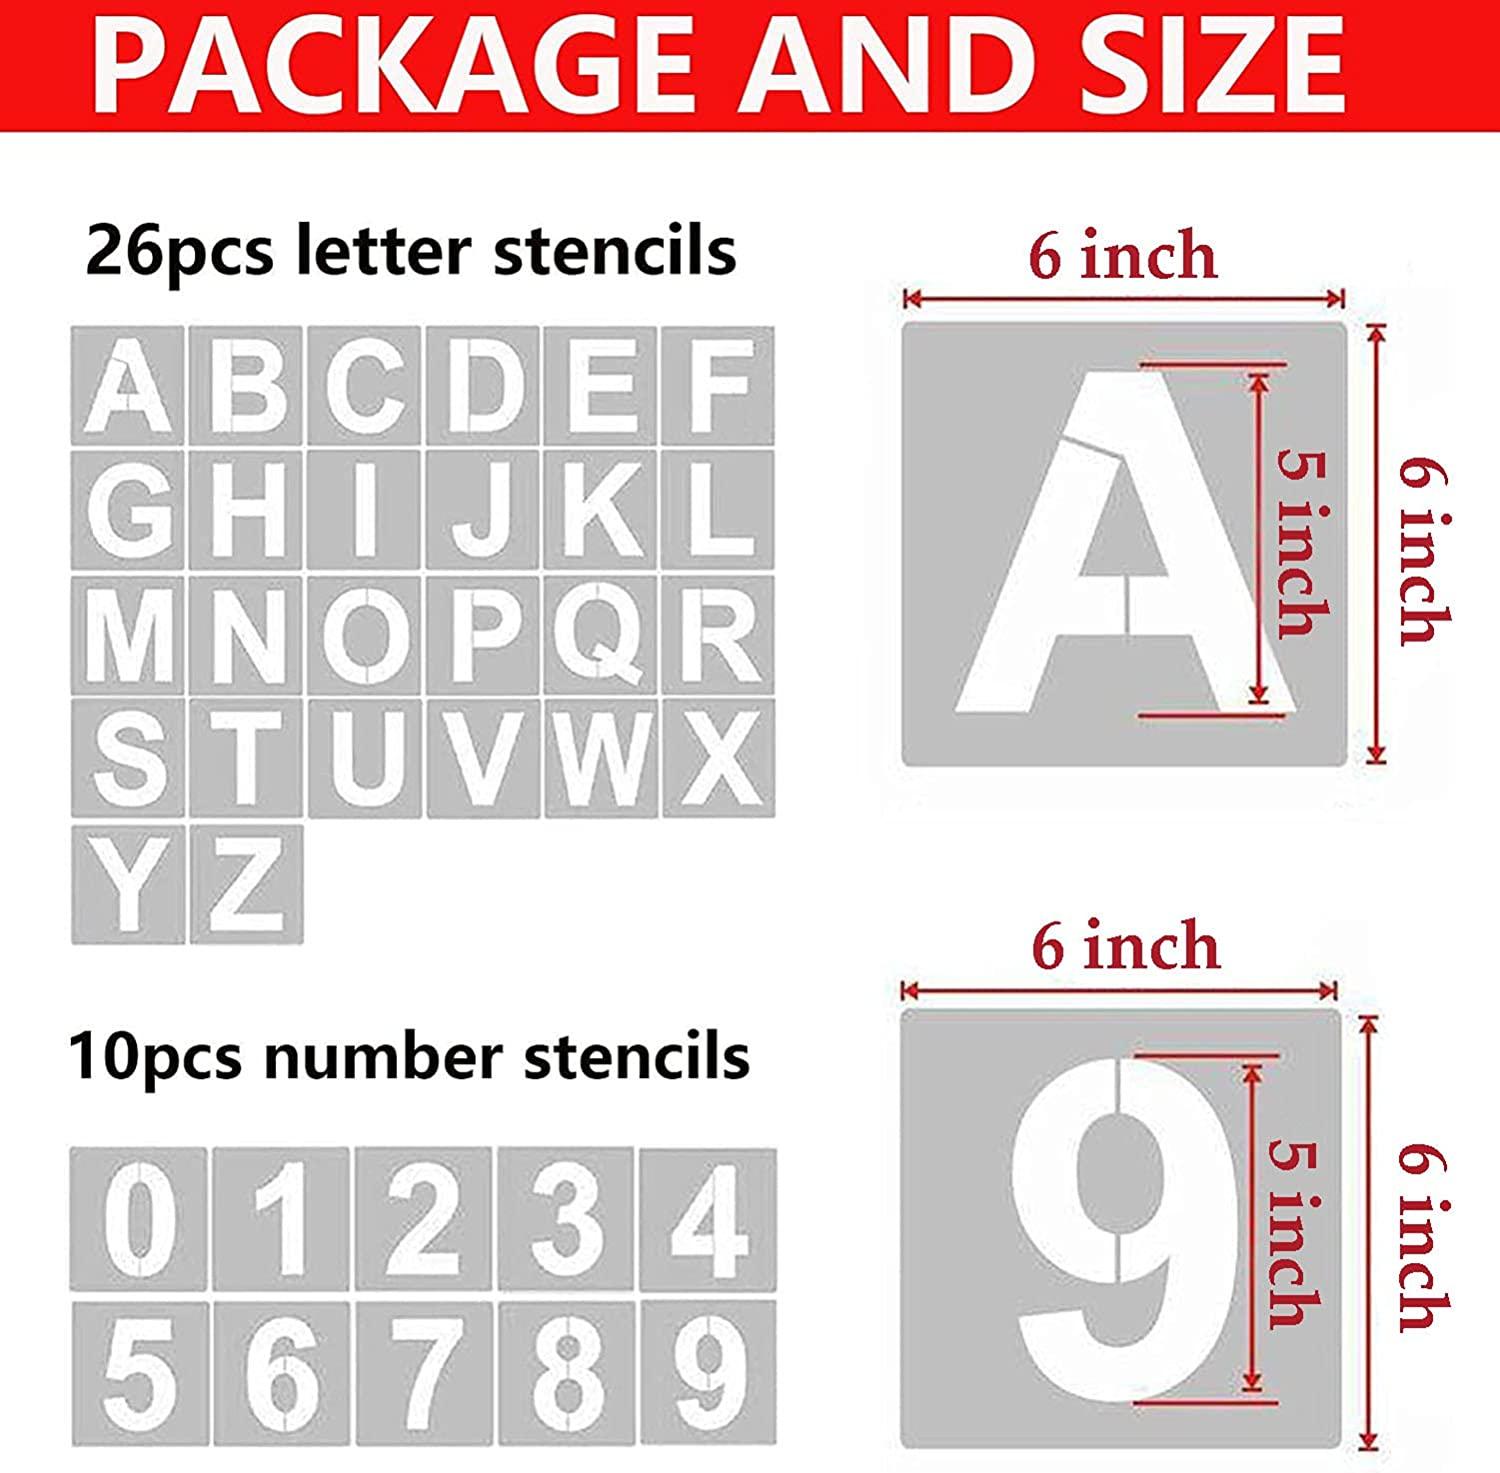 YEAJON 6 Inch Letter Stencils and Numbers, 36 Pcs Alphabet Art Craft  Stencils, Reusable Plastic Art Craft Stencils for Wood, Wall, Fabric, Rock,  Chalkboard, Signage, DIY School Art Projects (6 Inch)